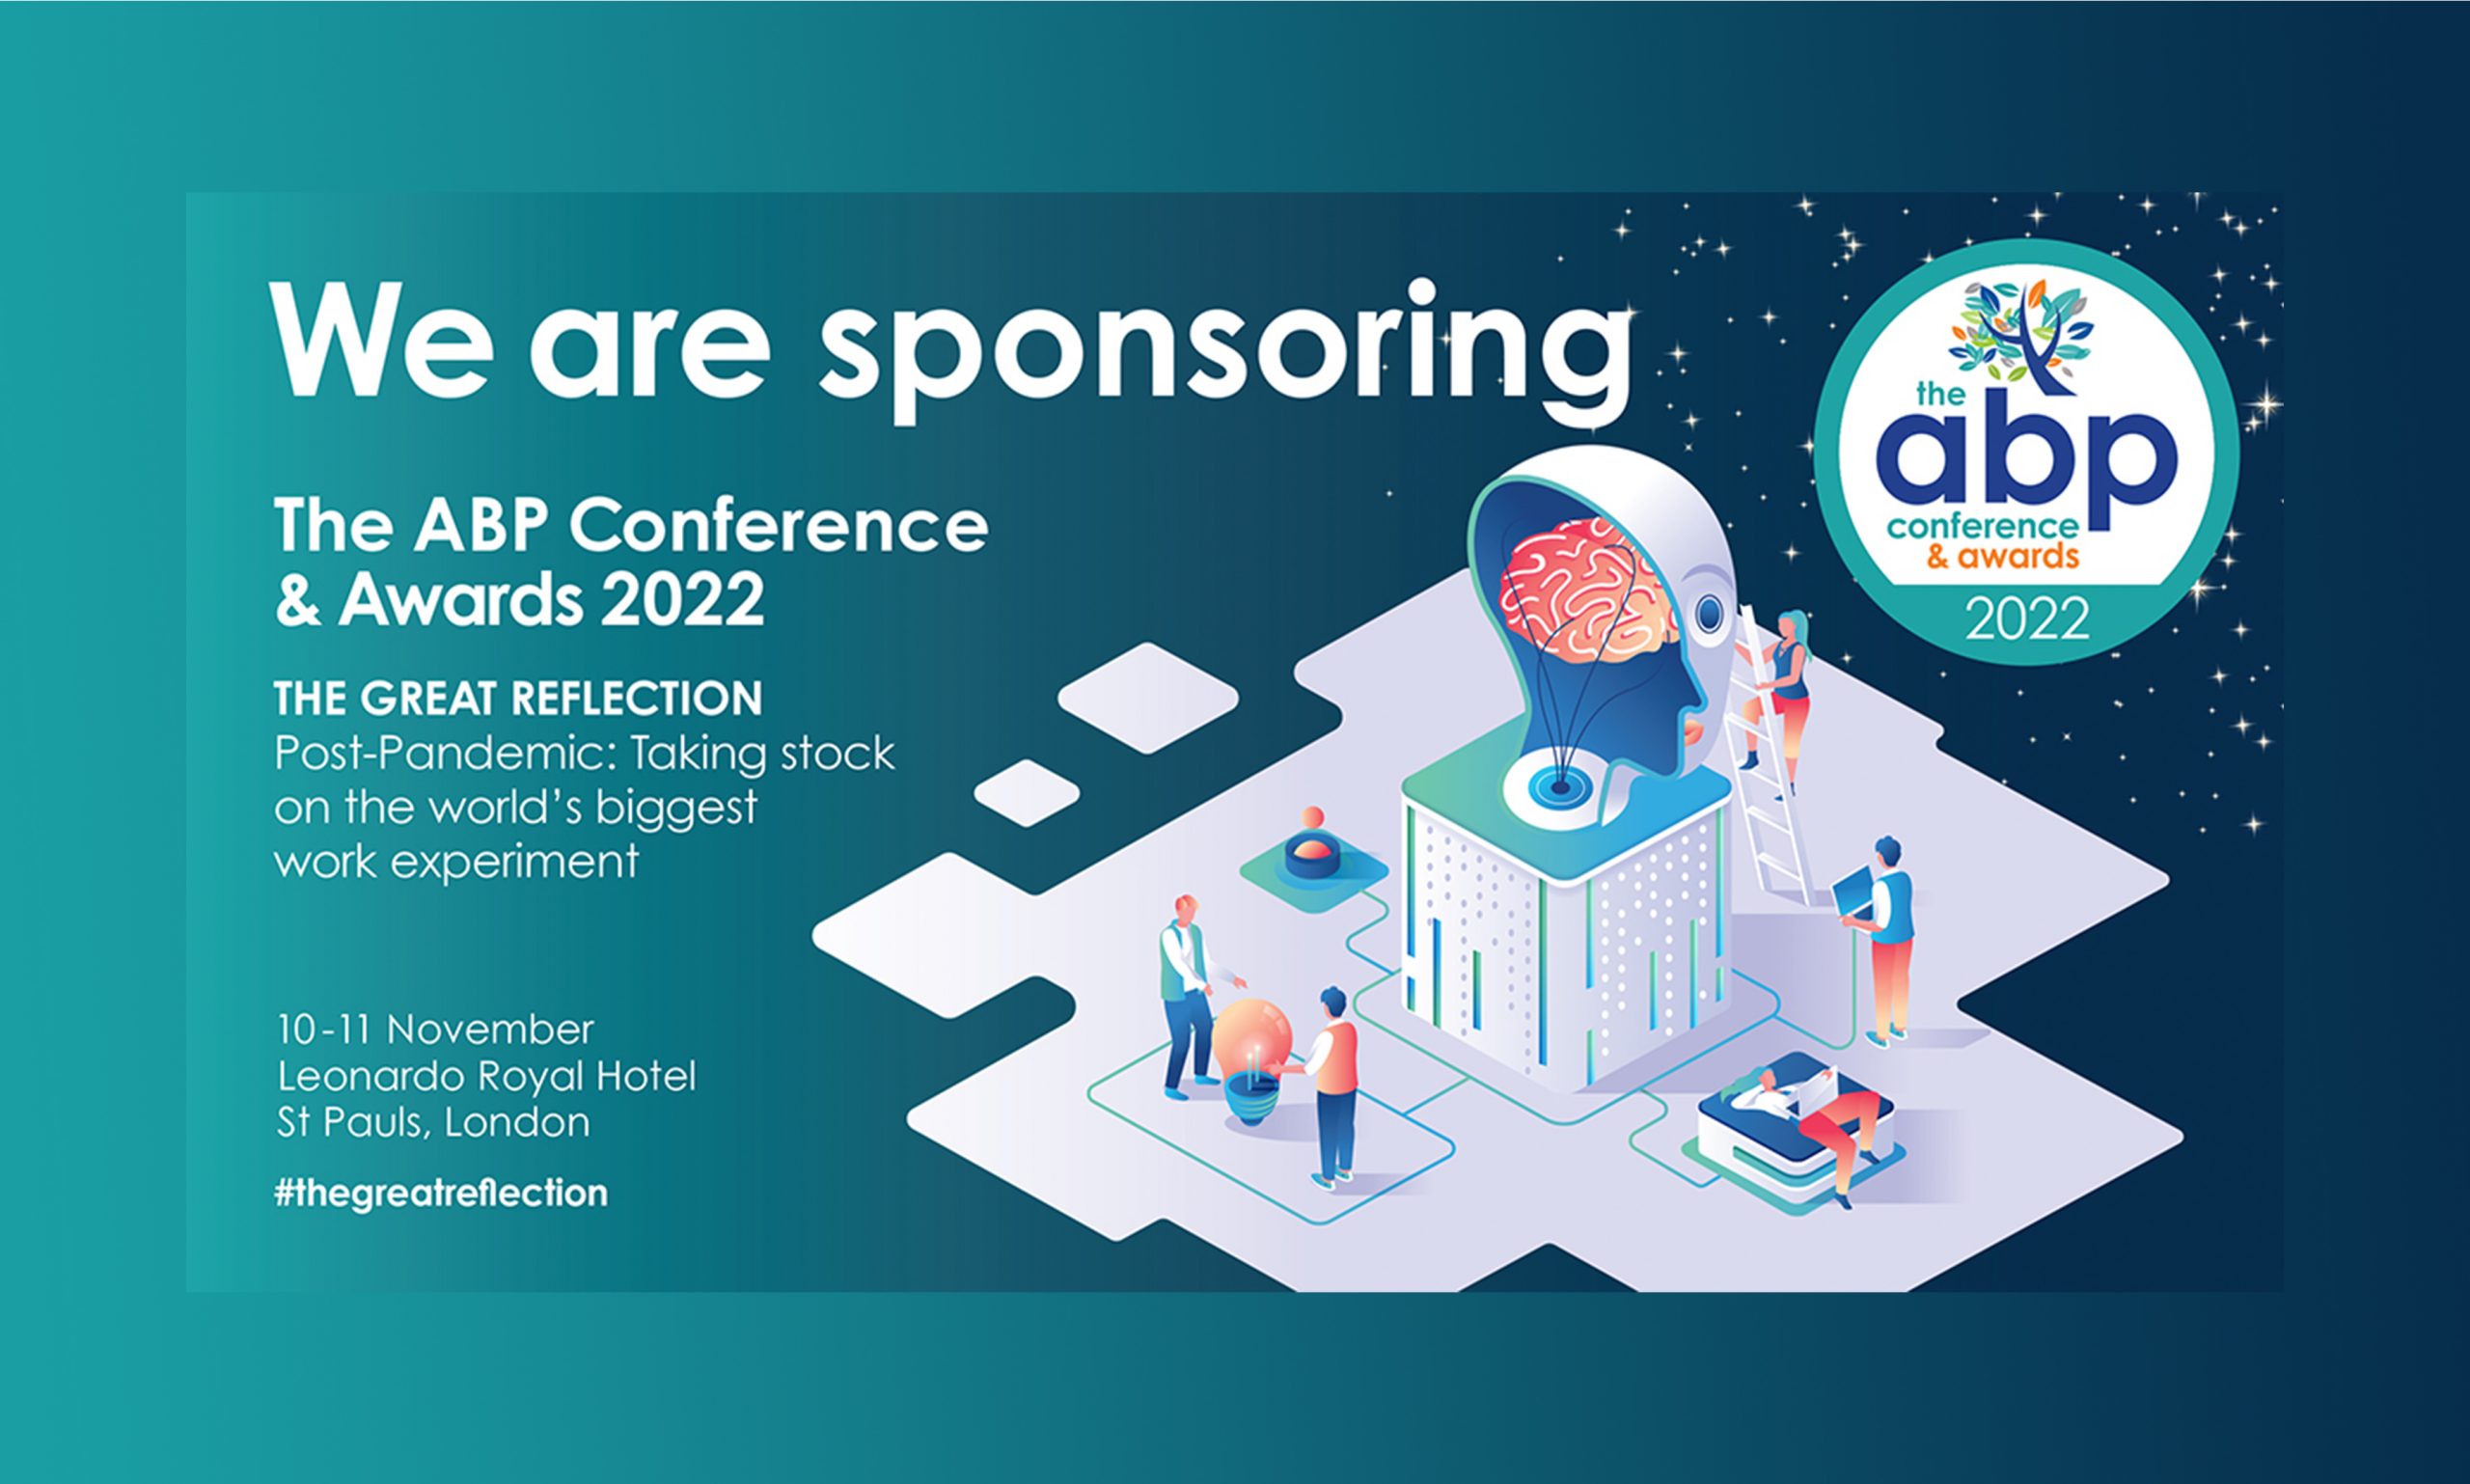 ATP Europe conference taking place at the Radisson Blu Edwardian Heathrow, London on 11 – 13 October 2022